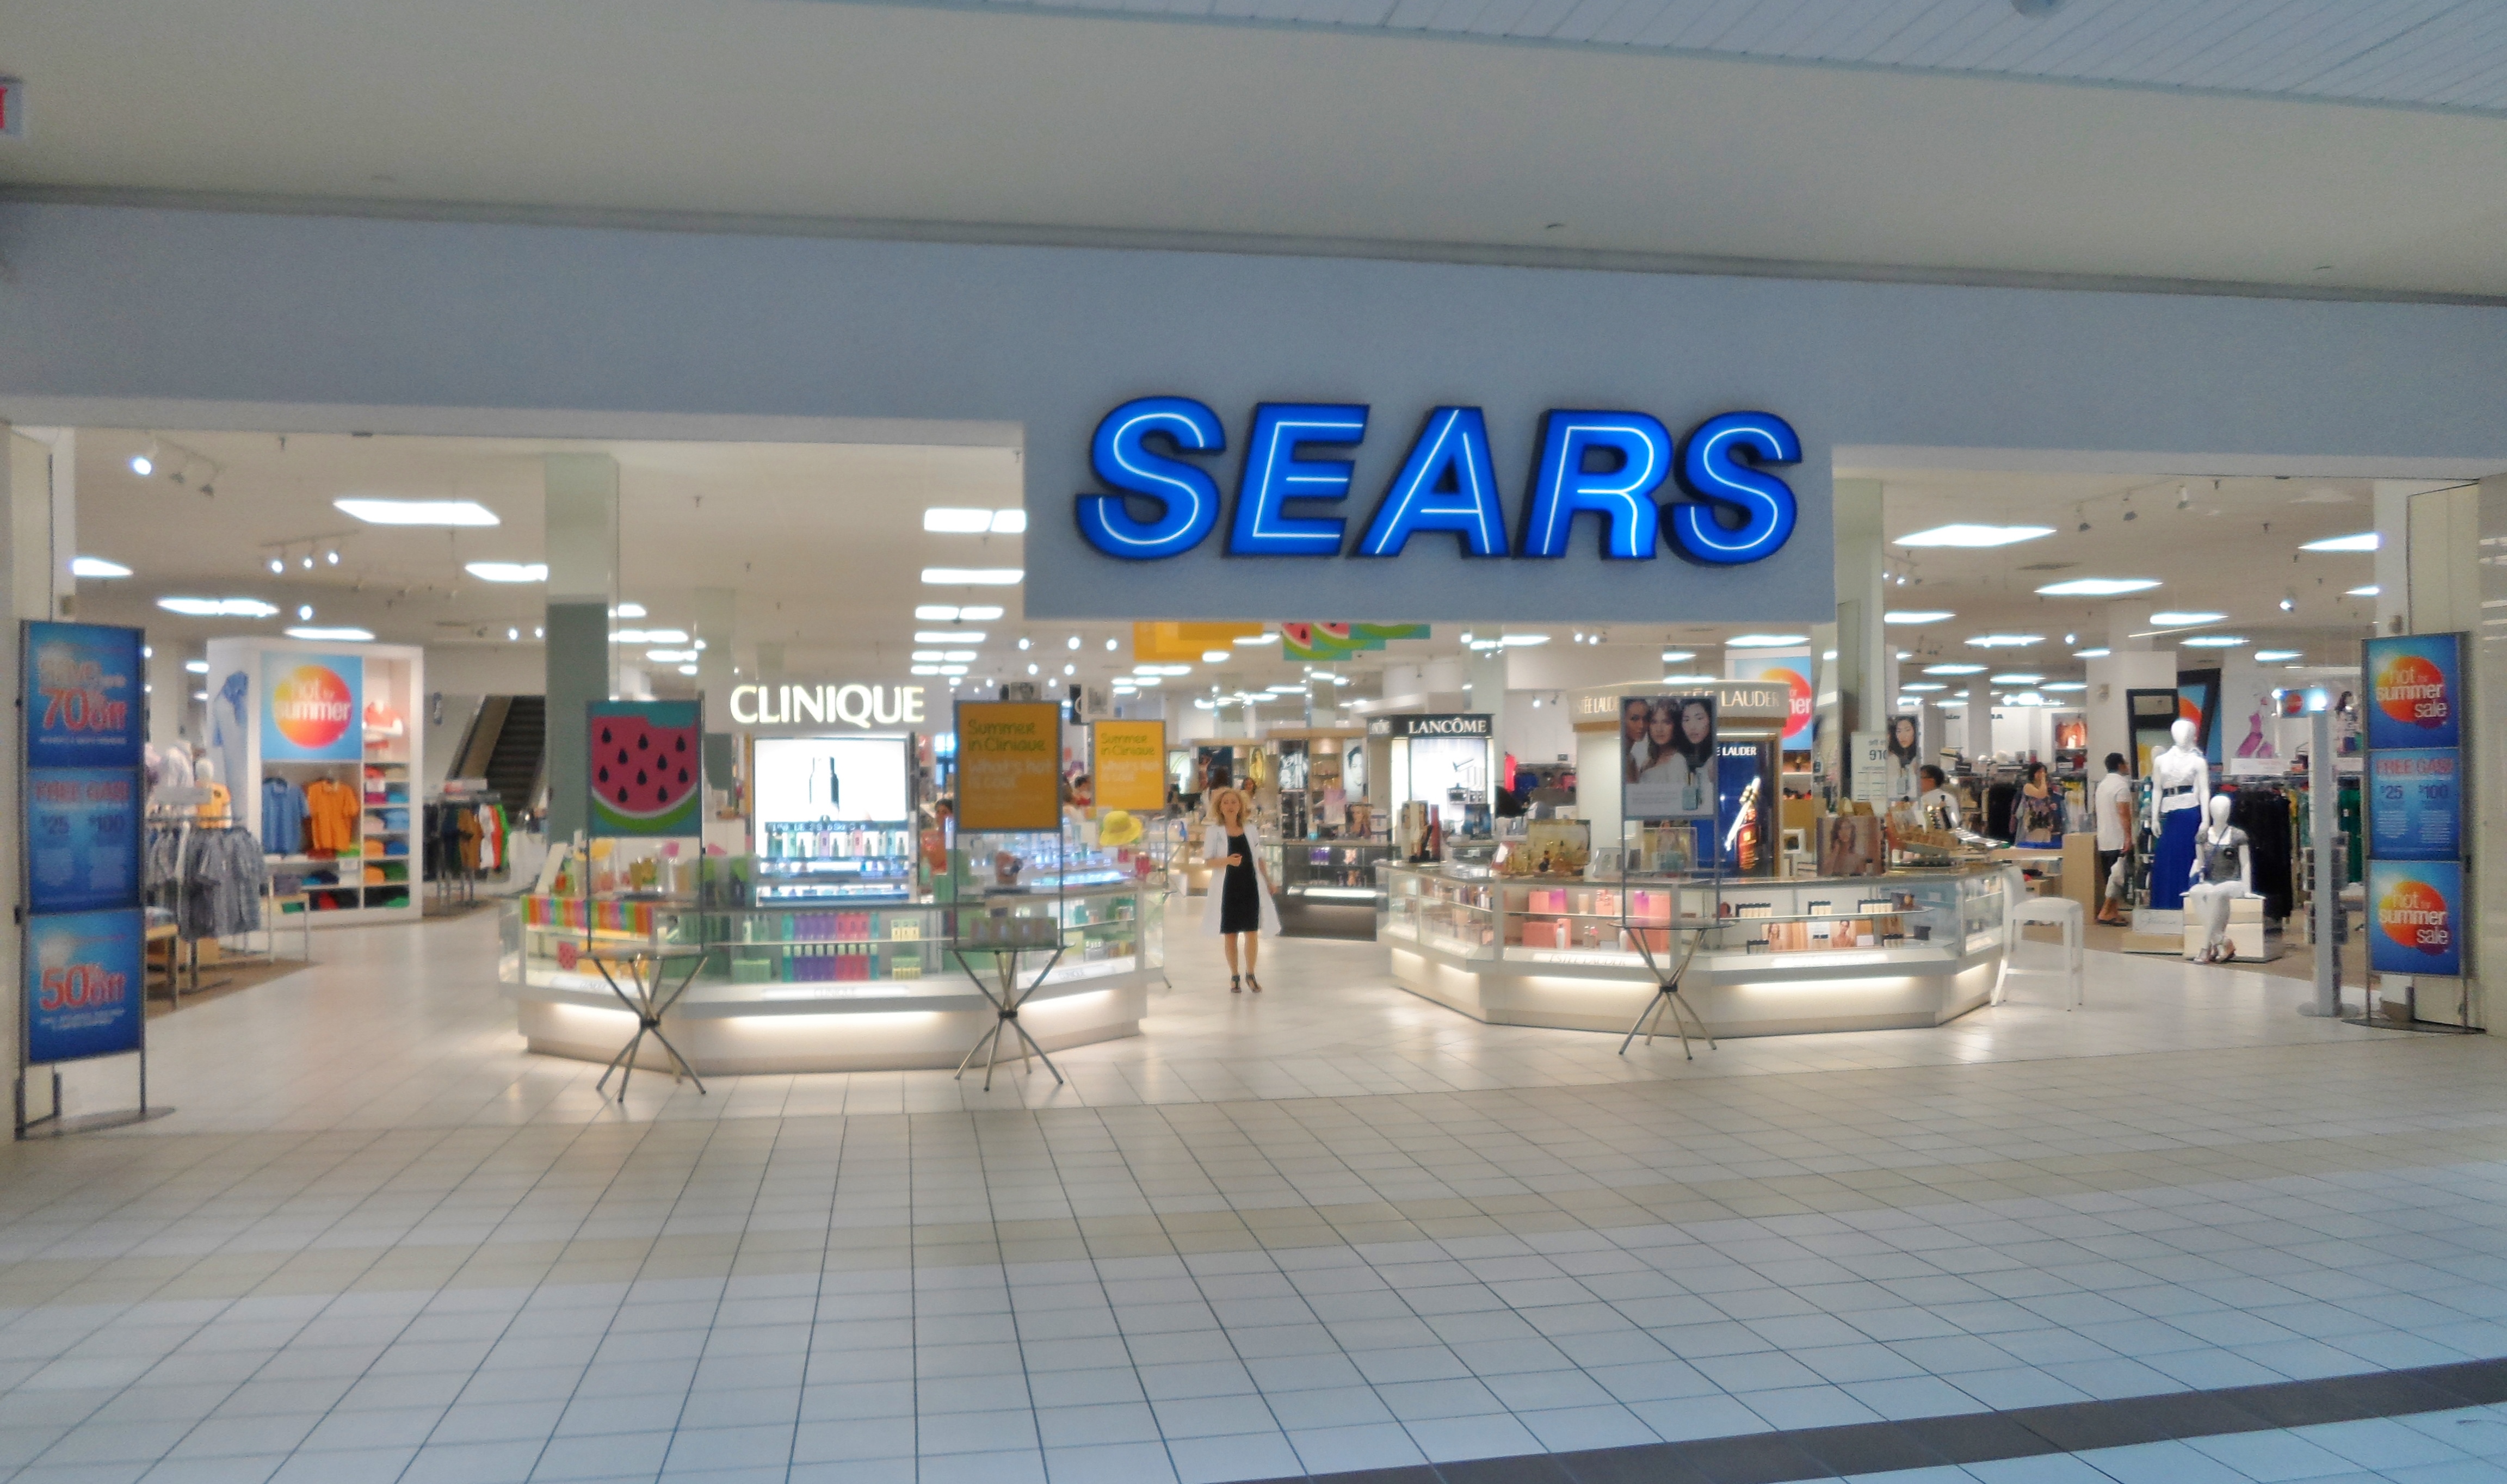 Sears CEO Proves Ayn Rand 'Economics' Fail Every Time Crooks and Liars